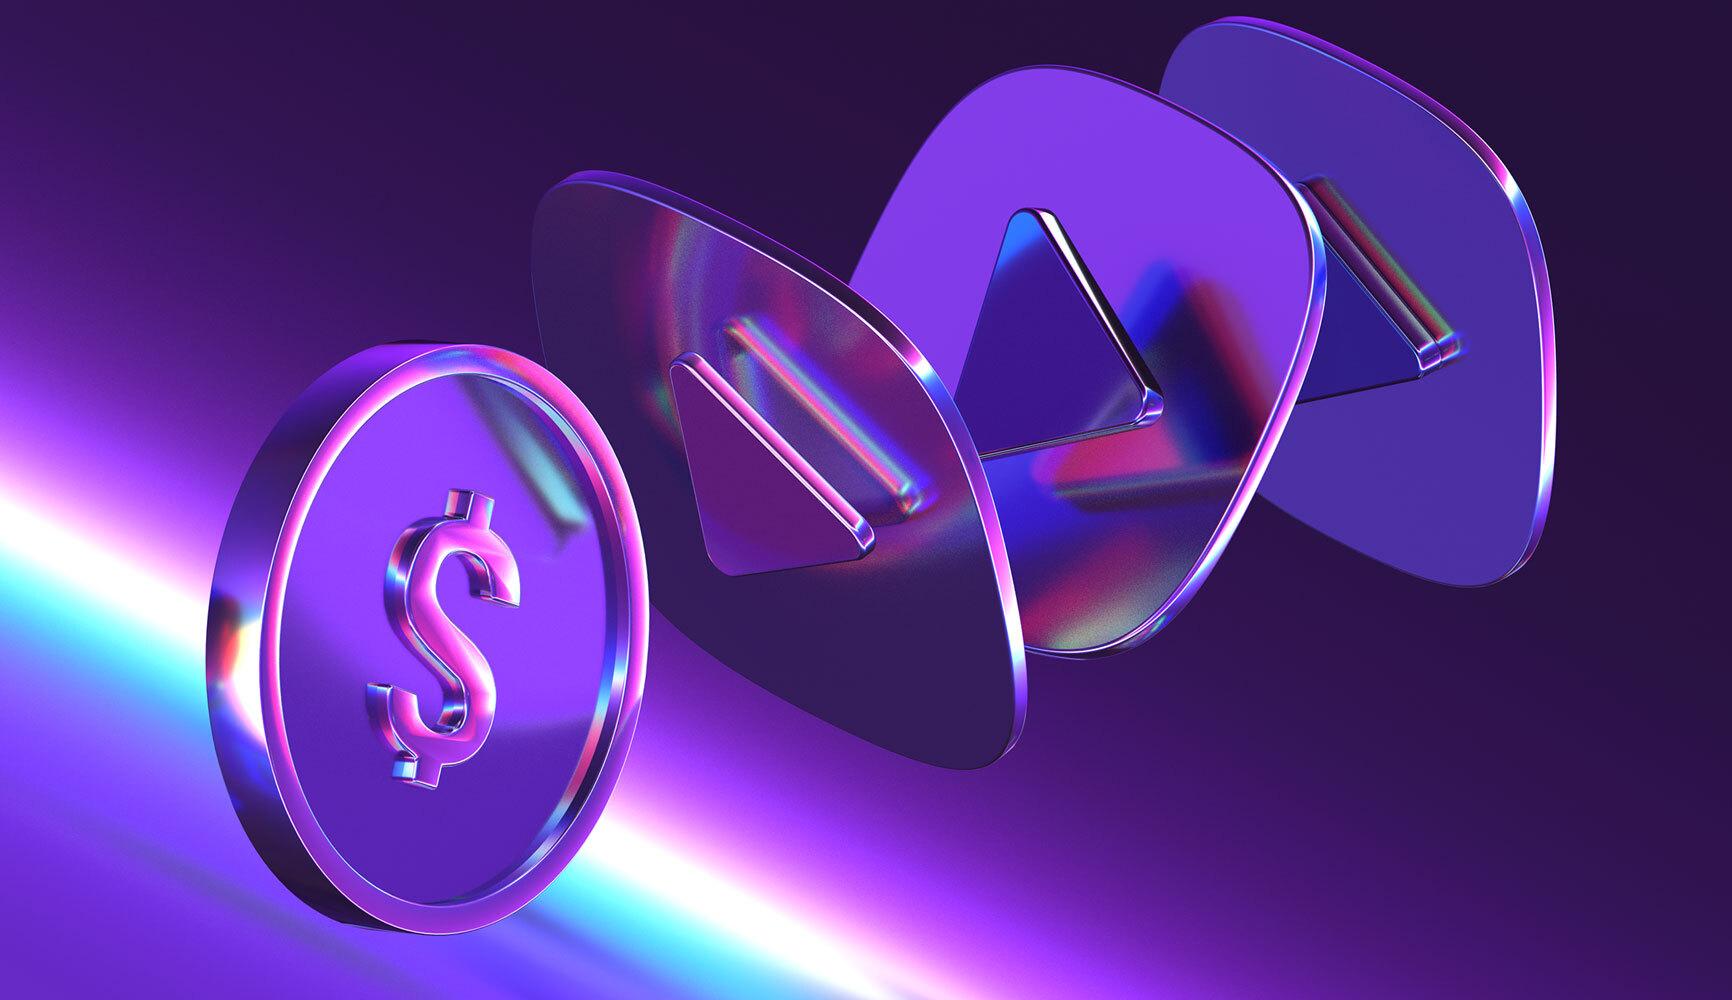 A shiny 3D representation related to where to watch ads for money, featuring a metallic dollar sign and play buttons floating in a row, illuminated by a neon purple and blue gradient background.